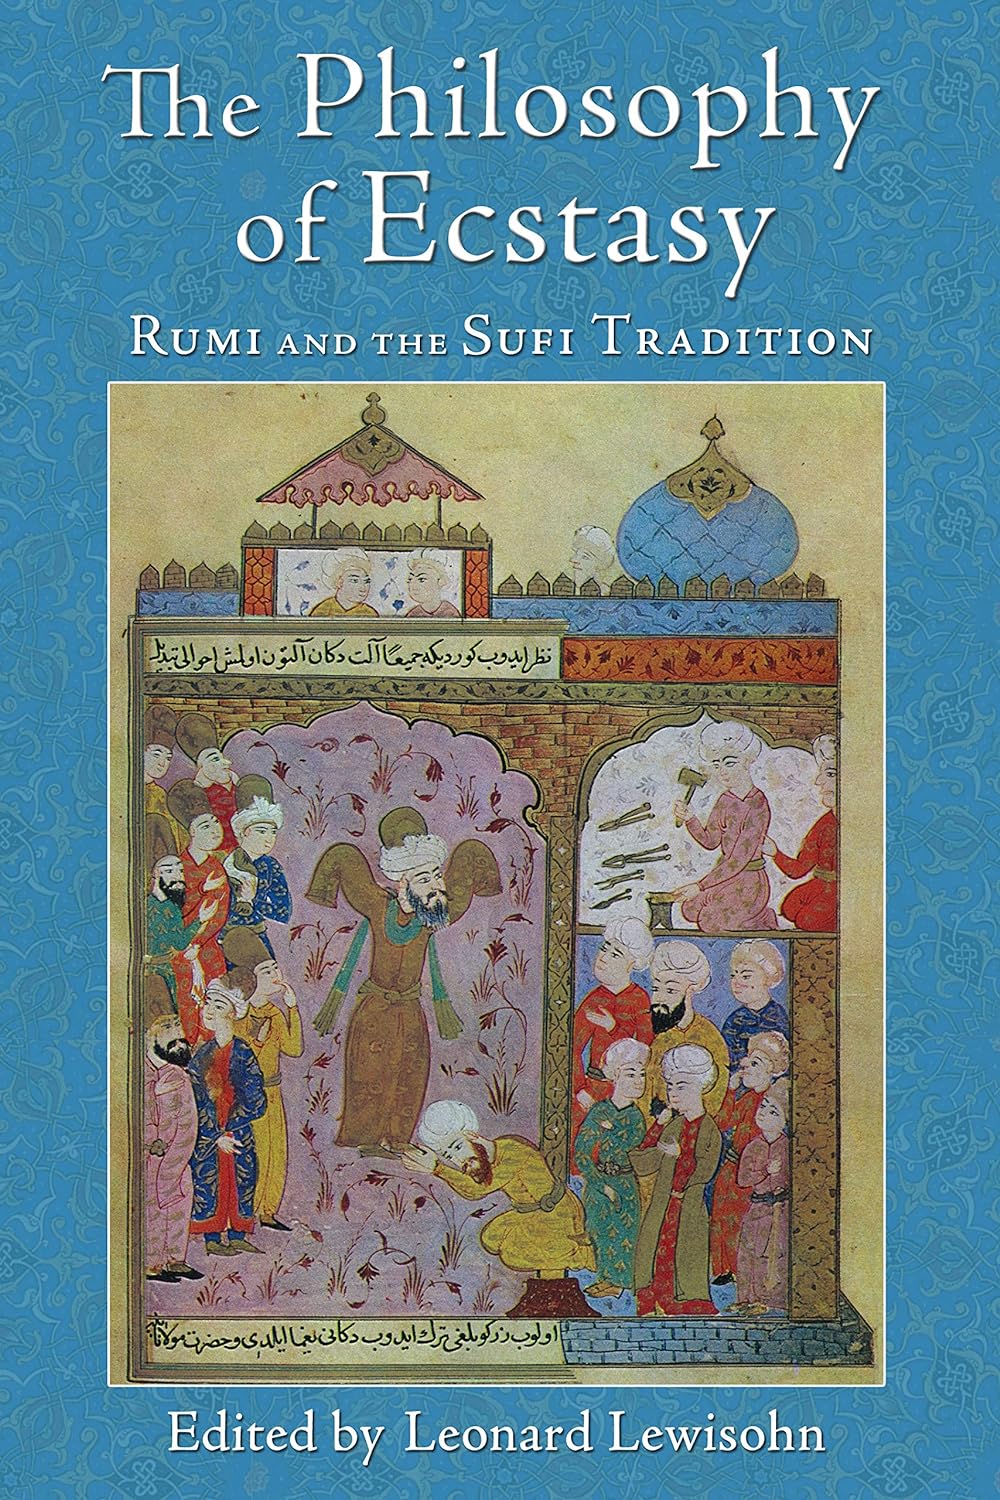 books-about-rumi